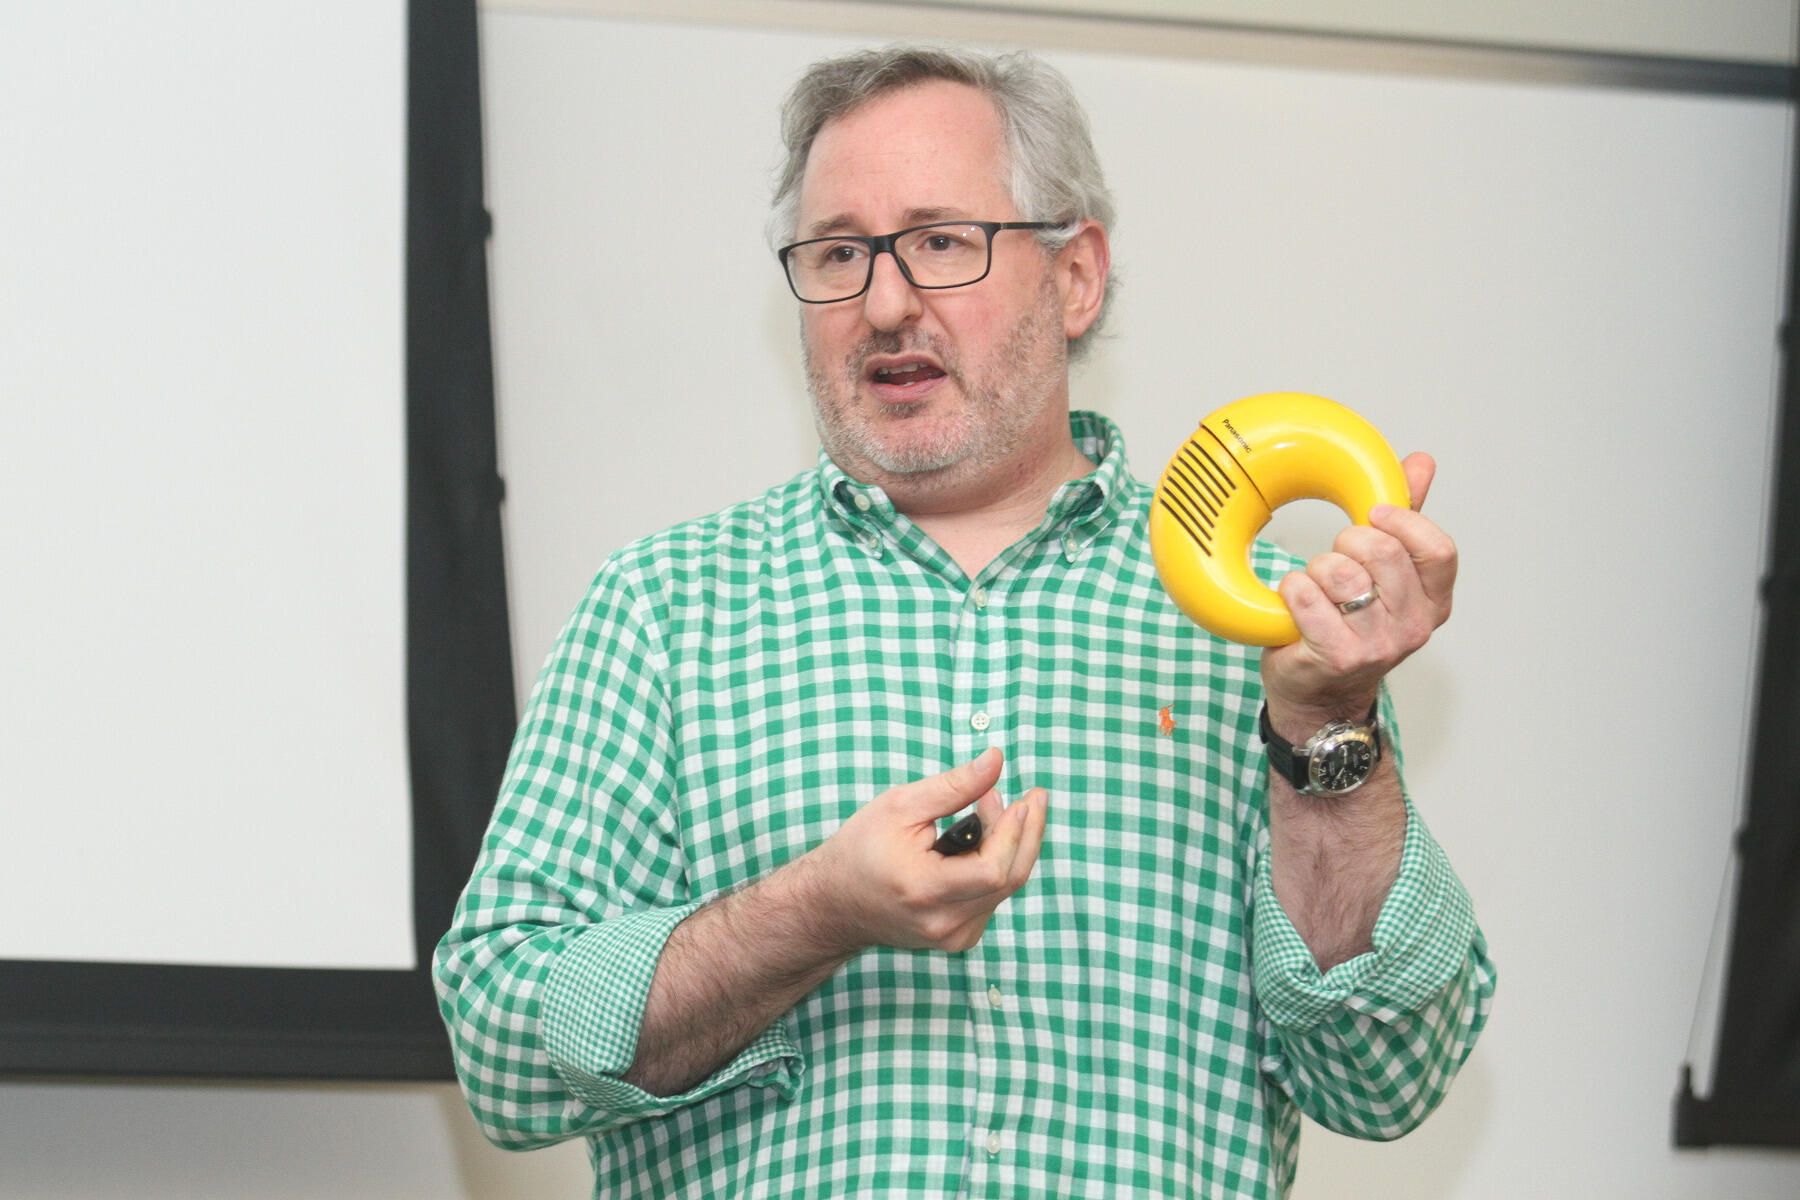 Craig Dubitsky, founder and CEO of Hello Products, models a 1970s Panasonic R72 wearable radio while speaking to a marketing class at the Virginia Commonwealth University School of Business.
<br>Photos by Pat Kane, University Public Affairs